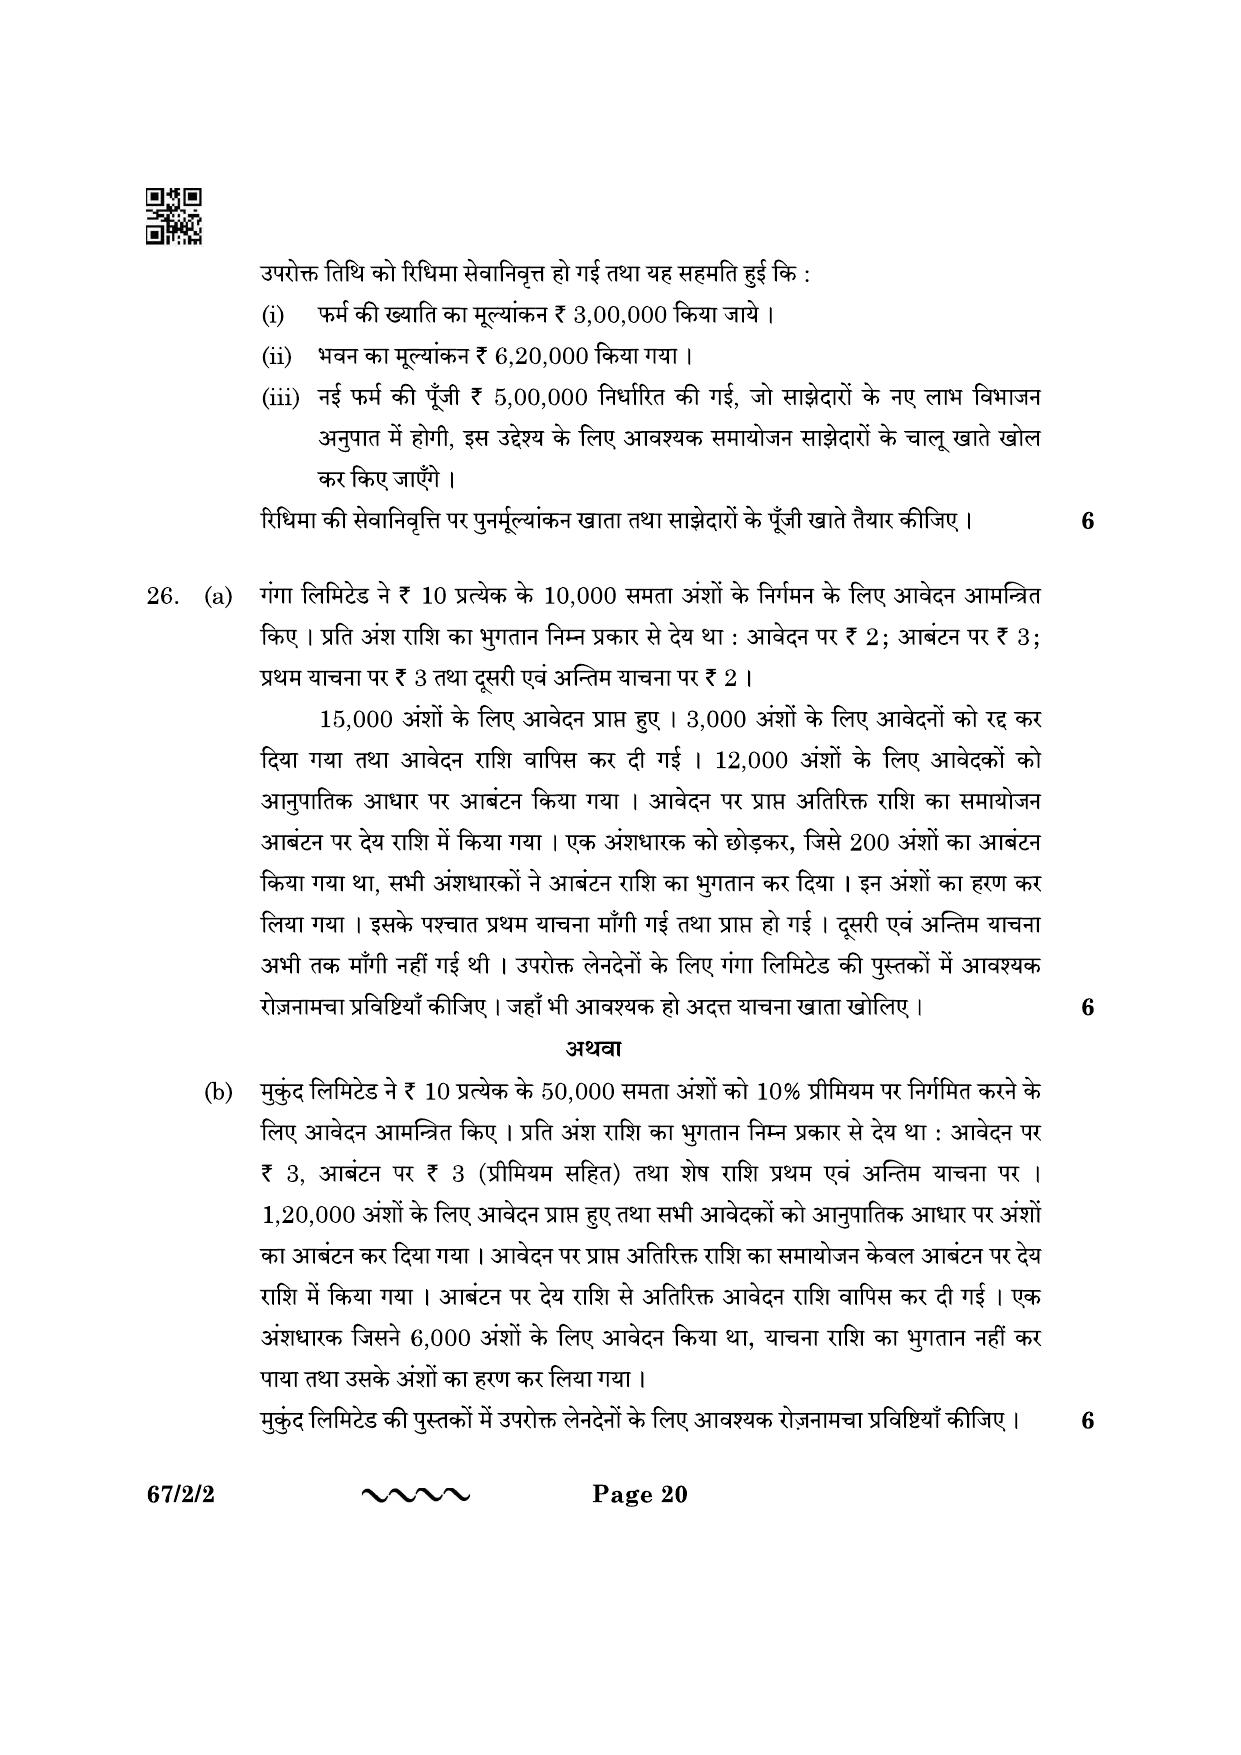 CBSE Class 12 67-2-2 Accountancy 2023 Question Paper - Page 20